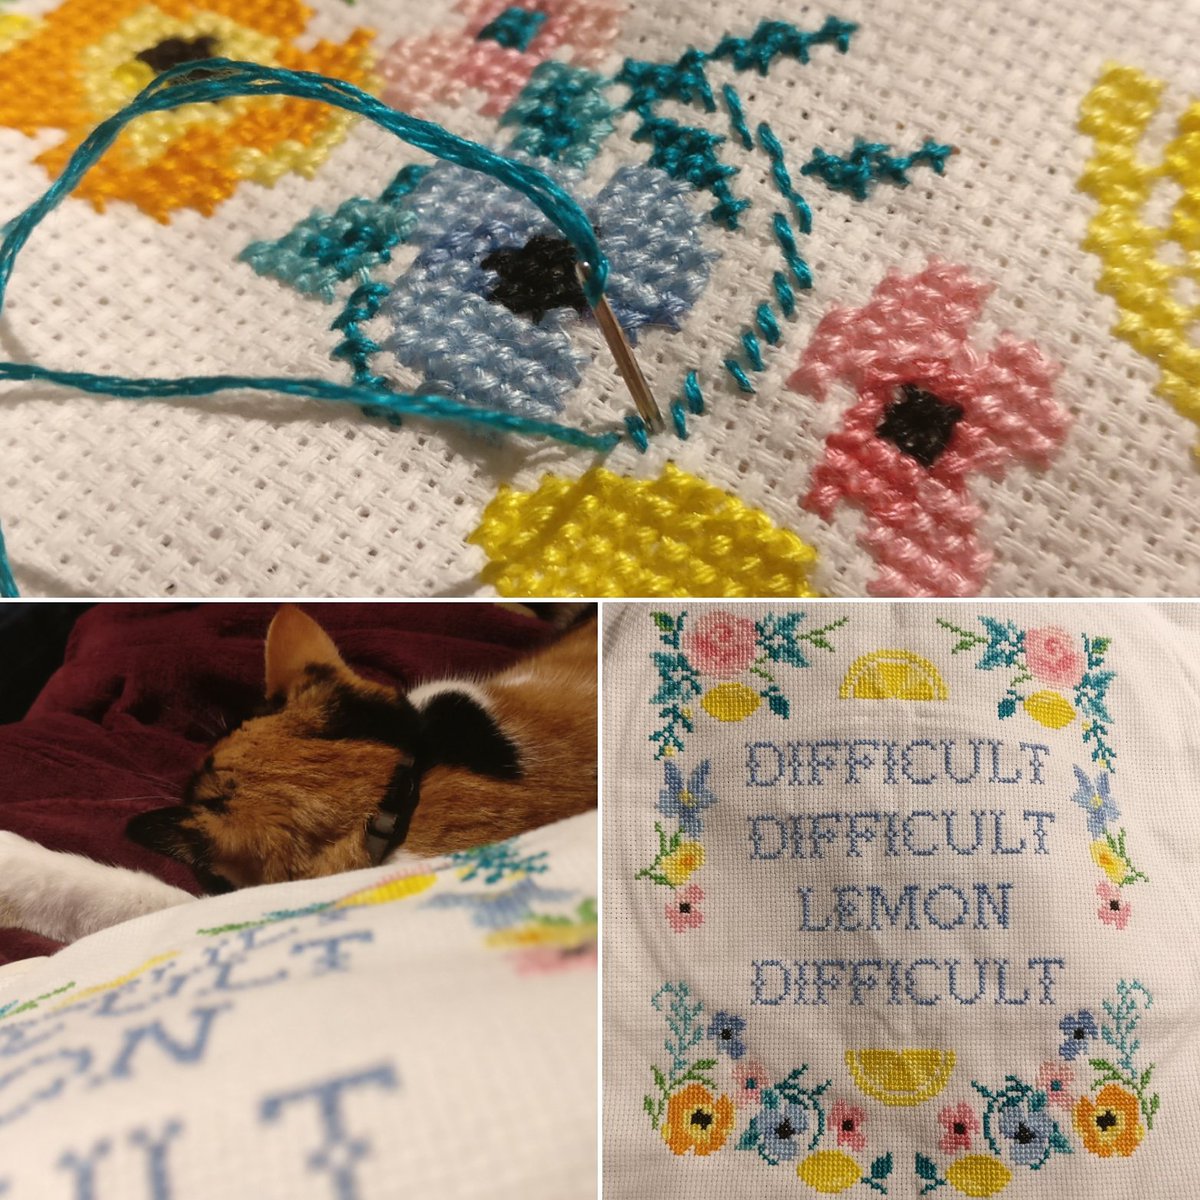 I only went and flipping finished it 🙌🙌🙌 I'm also trying out Instagram at the moment which is why the photoset is snazzy #crossstitch #ignoringbrexit #cats #cat #CatsOfTwitter #difficultdifficultlemondifficult